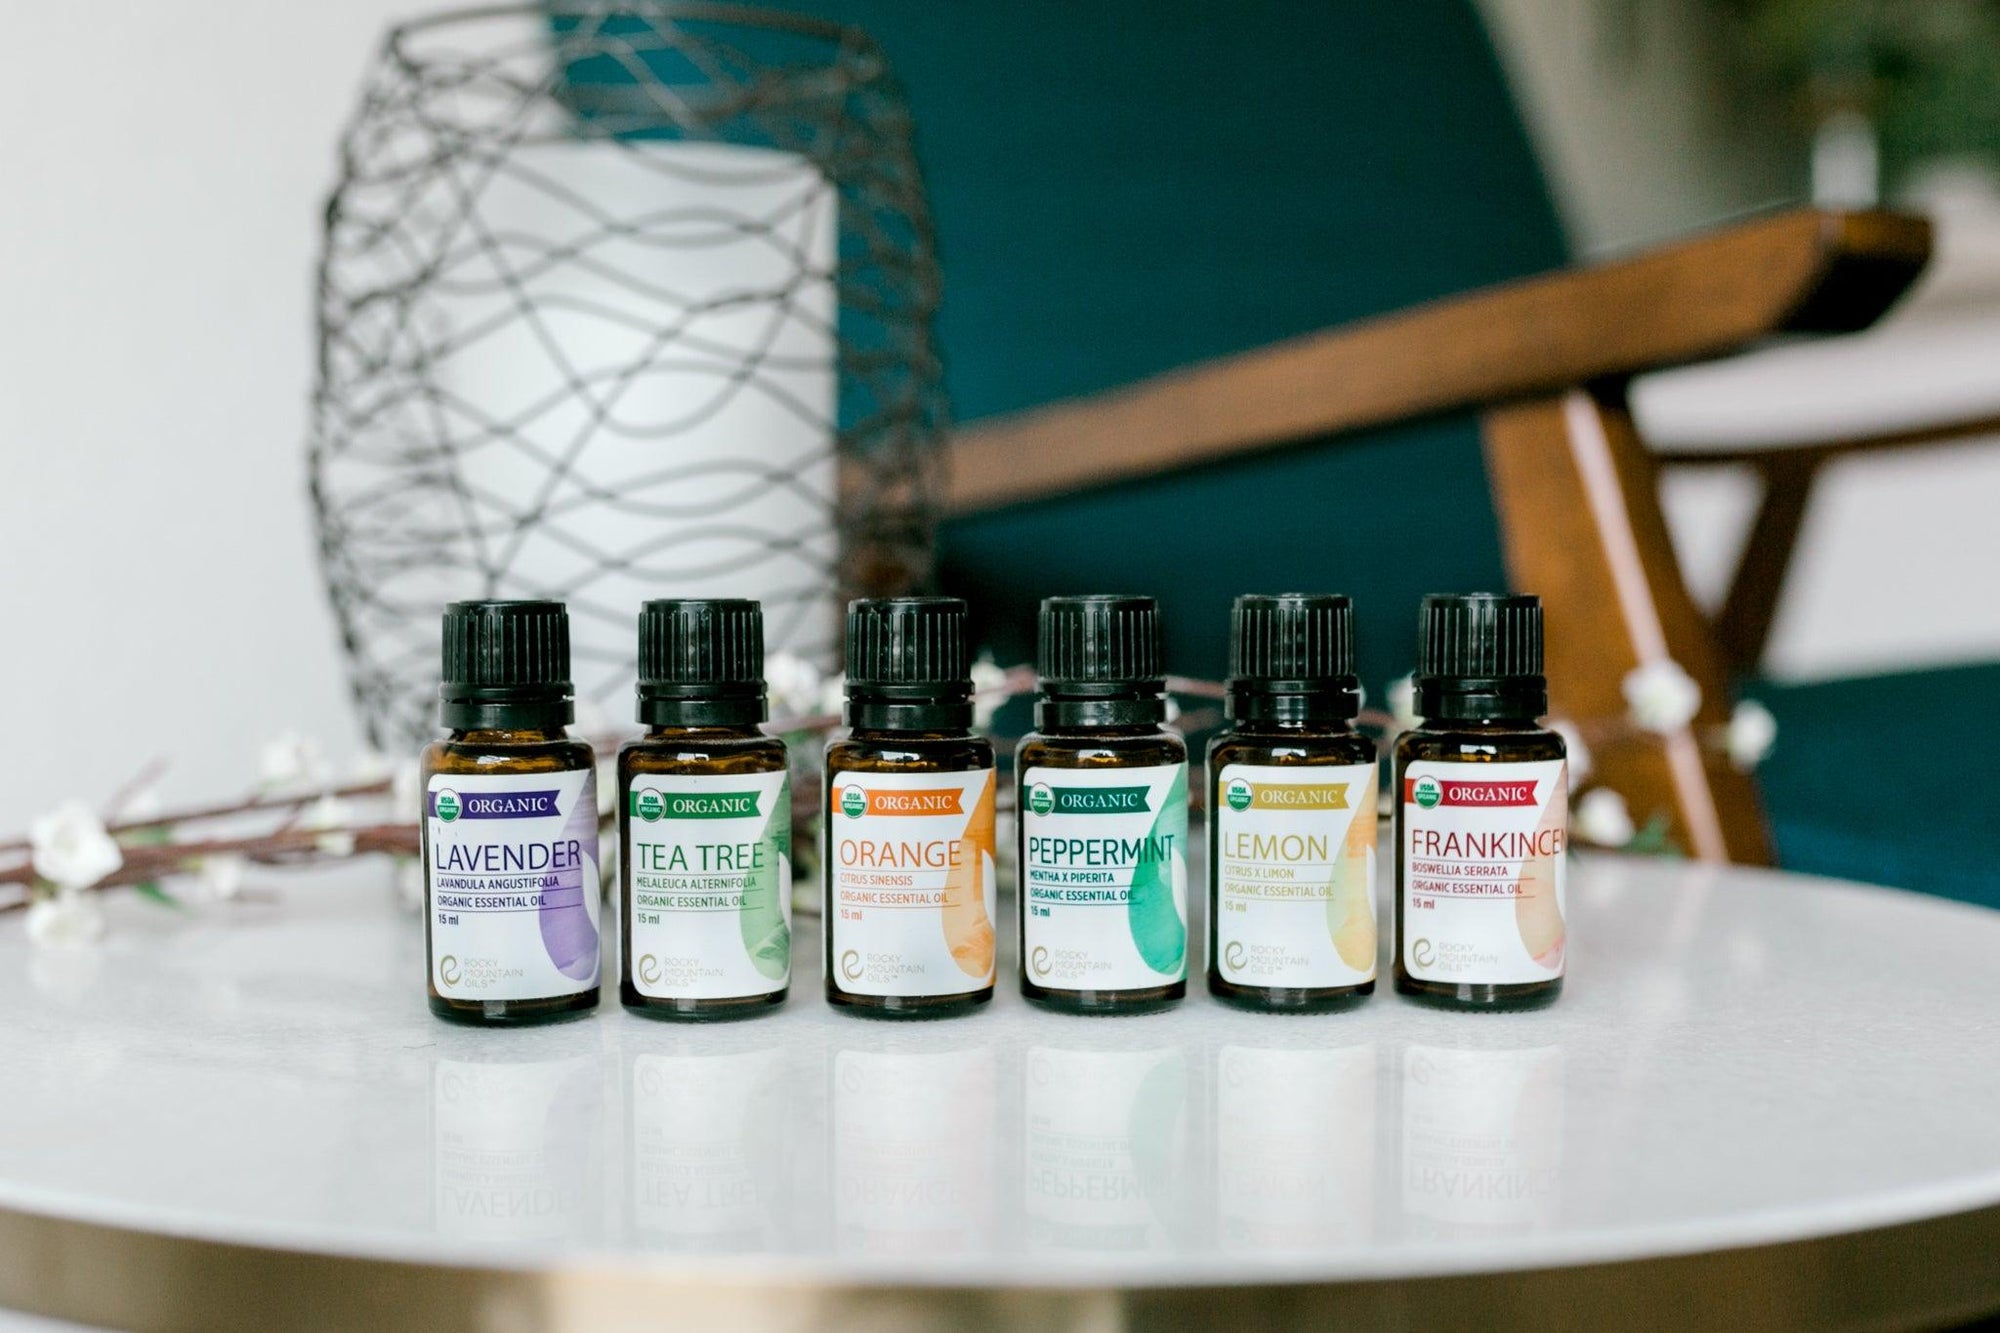 What Makes Organic Essential Oils So Different?